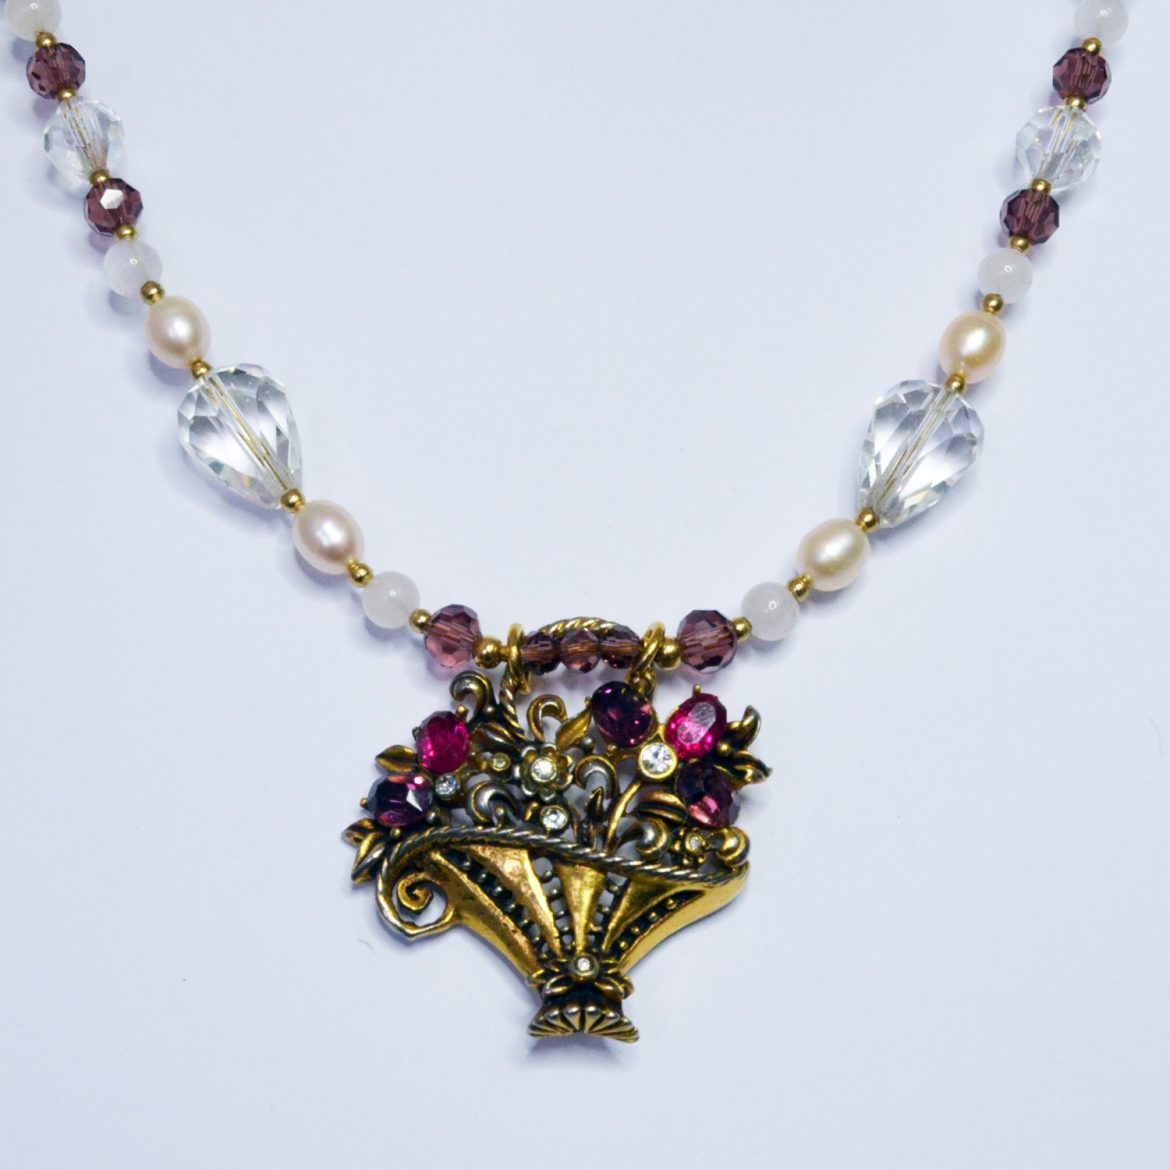 flower basket necklace dangerous liaisons literary inspired jewellery